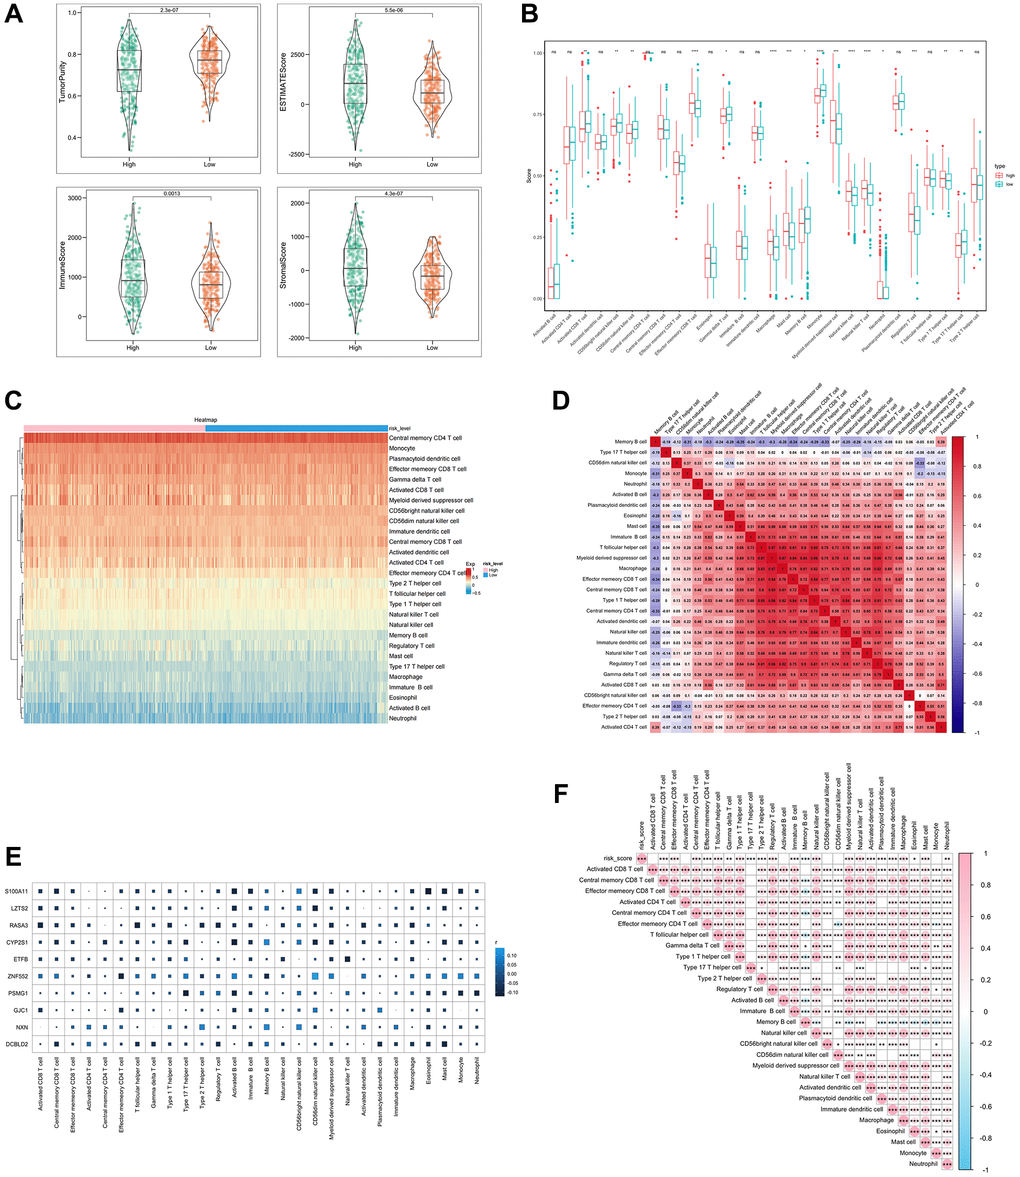 Analysis of immune cell infiltration with SERGs risk group. (A) The ESTIMATE score, Immune score, and Stromal score between high- and low- SERGs risk groups were compared. (B) Violin diagram of 28 type immune cells in two groups. (C) Immune cells assessment between two groups. (D) Analysis of correlation in 28 type immune cells. (E) Correlation analysis of ten prognostic biomarkers (S100A11, LZTS2, CYP2S1, ZNF552, PSMG1, GJC1, NXN and DCBLD2) and immune cells. (F) Correlation analysis of risk score and immune cells.